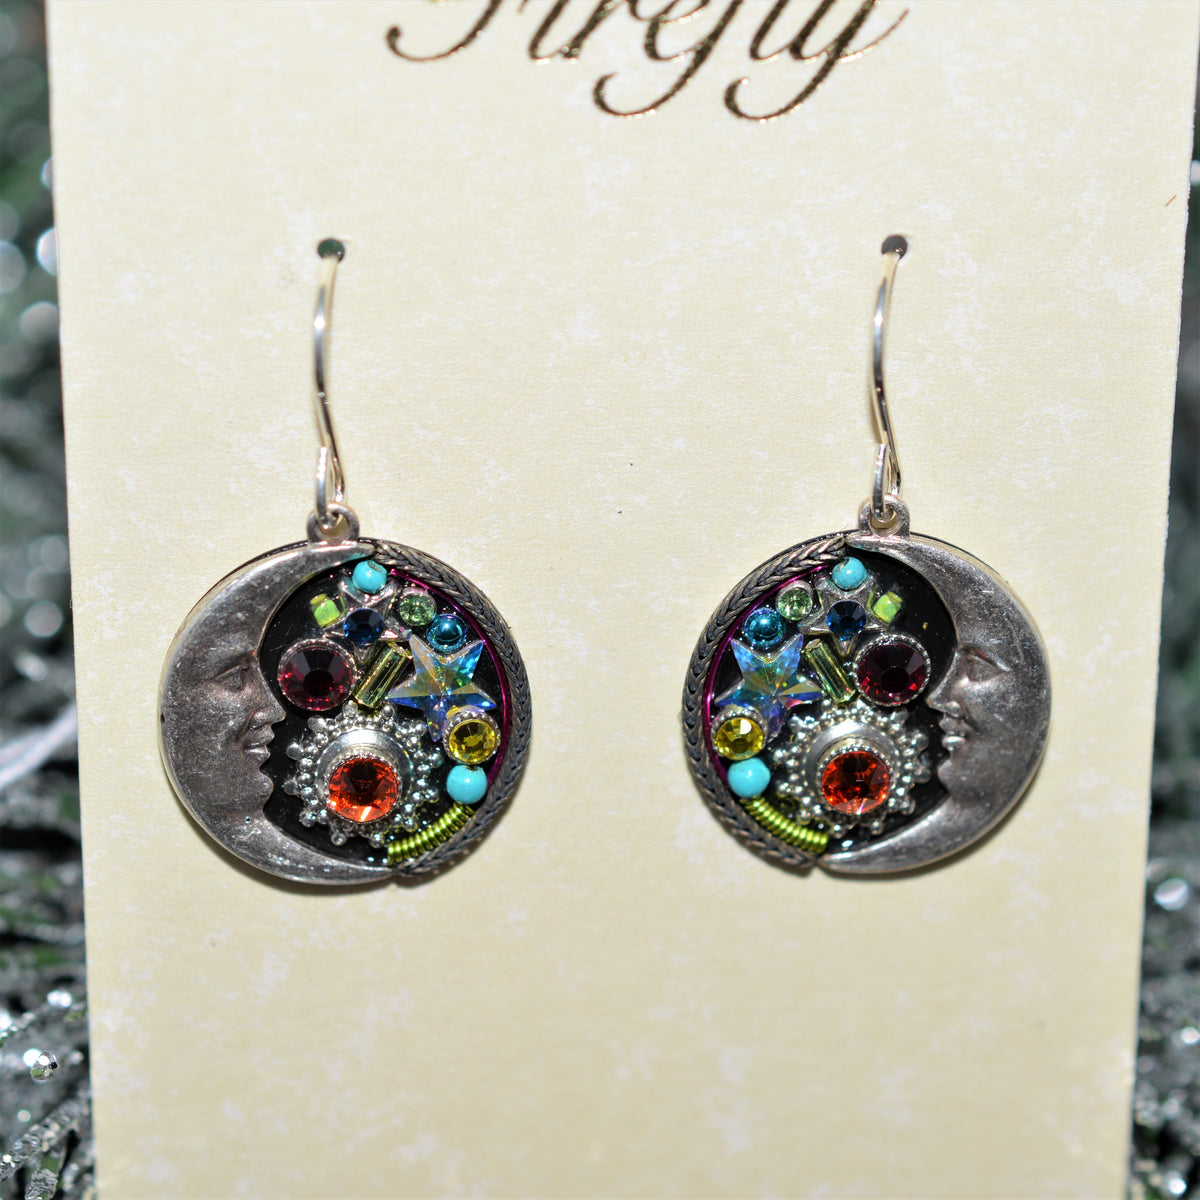 Antique Silver Plated Crescent Moon Earrings With Multicolor Crystals by Firefly